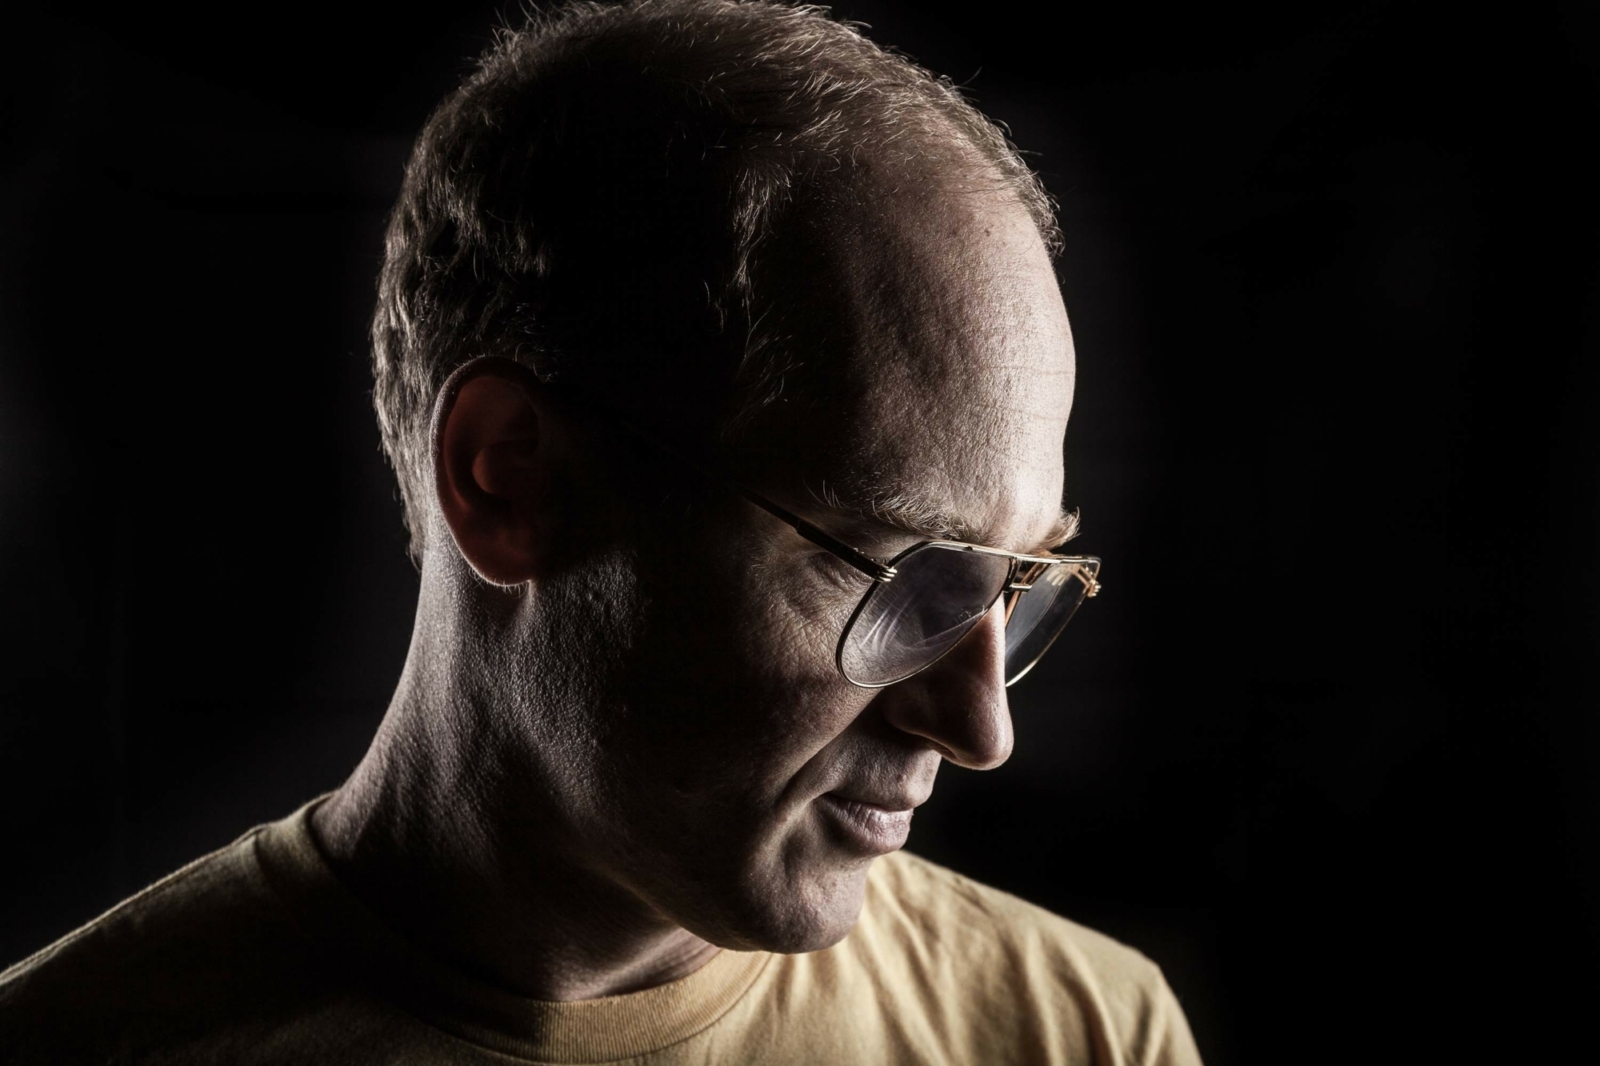 Daphni shares 'Hey Drum' from upcoming FABRICLIVE mix